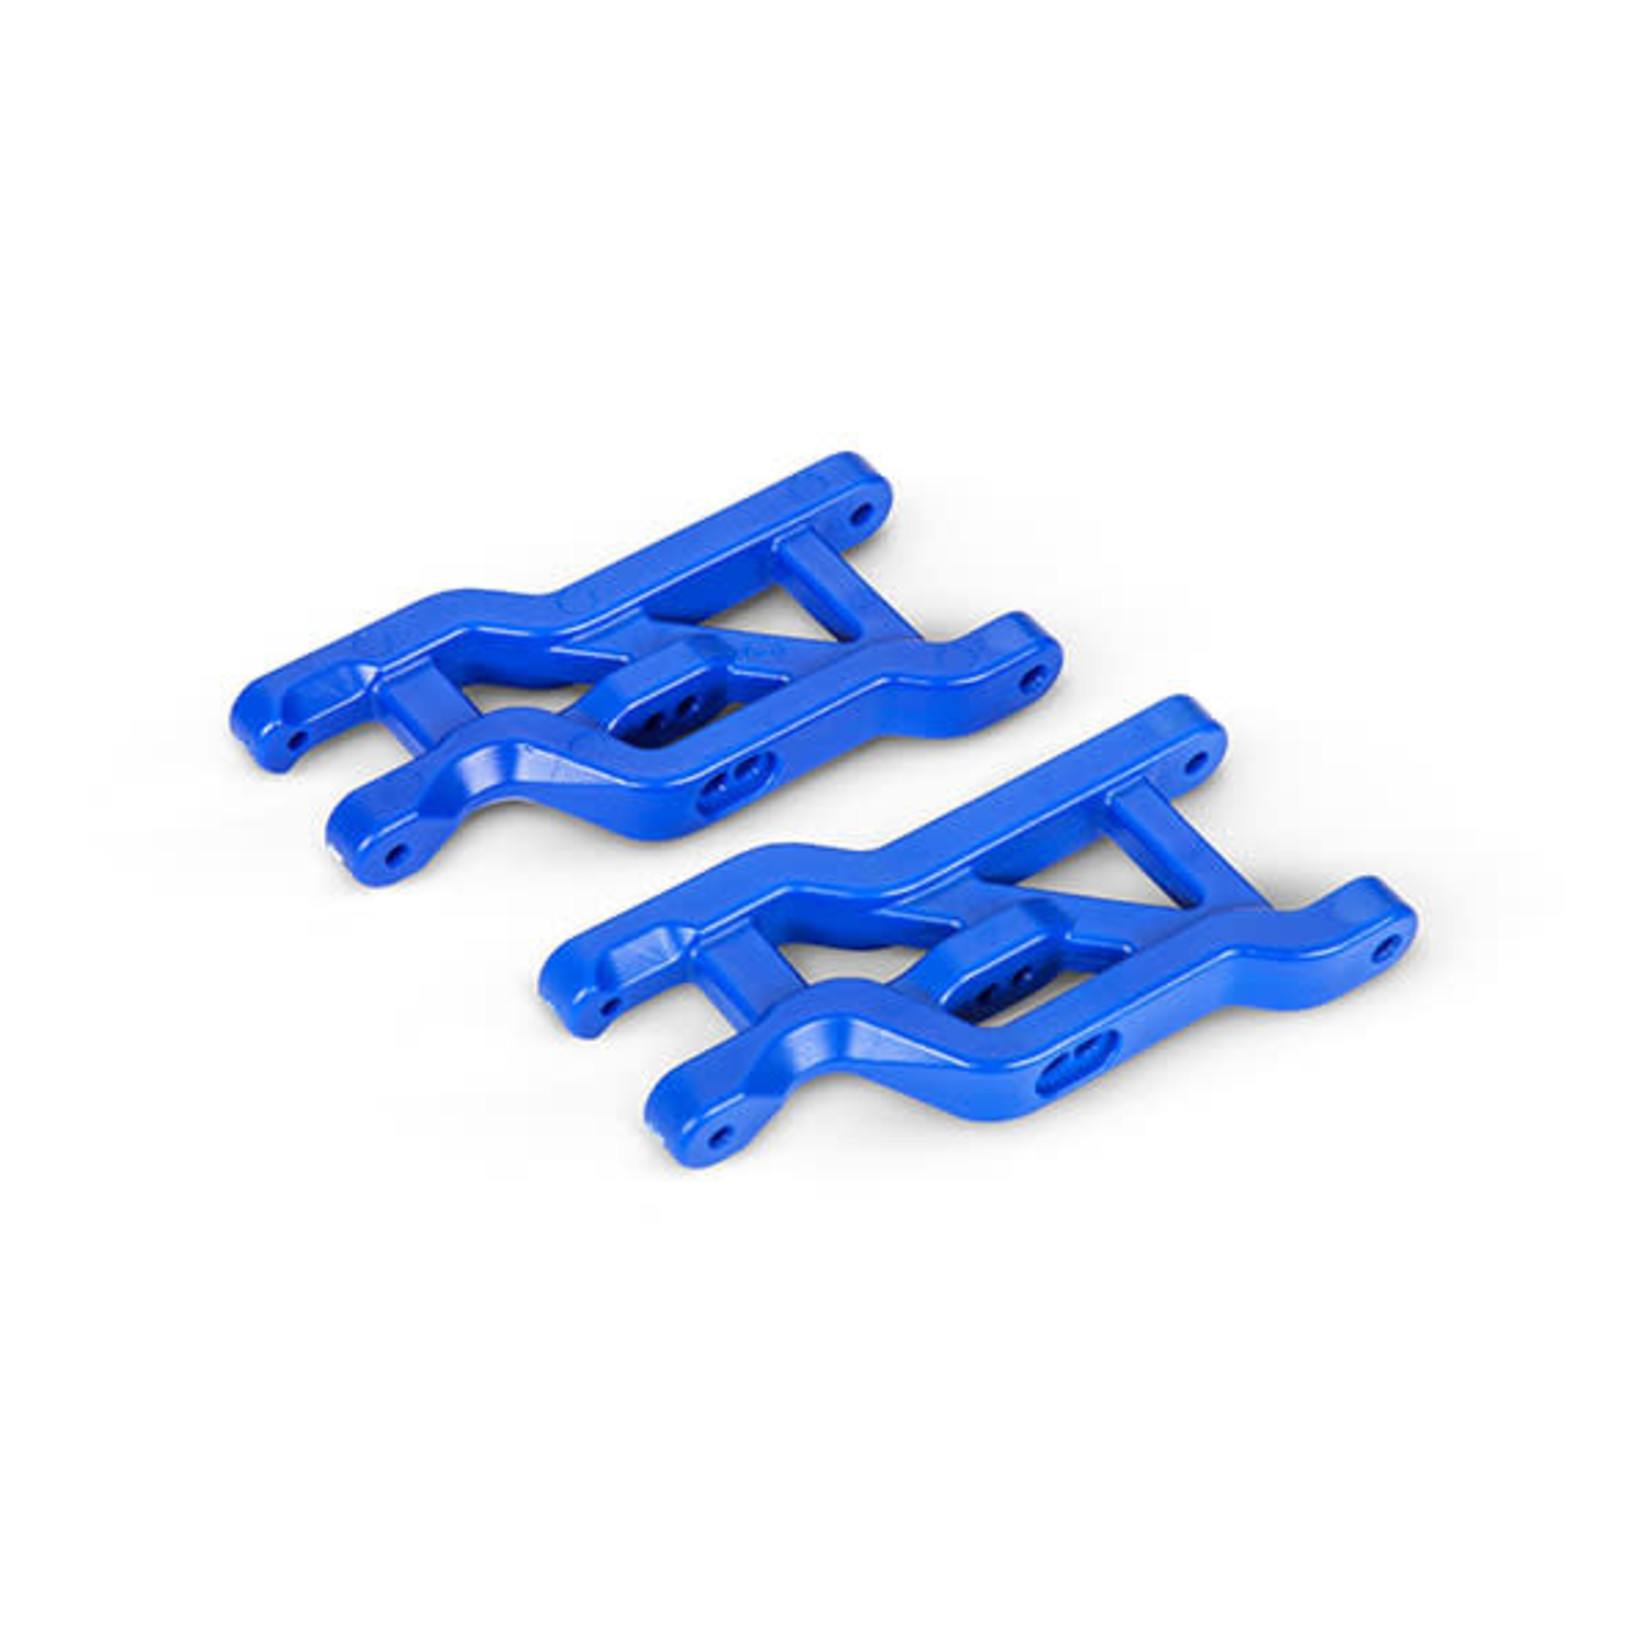 Traxxas Traxxas Front Heavy Duty Suspension Arms (Blue) (2) #2531L